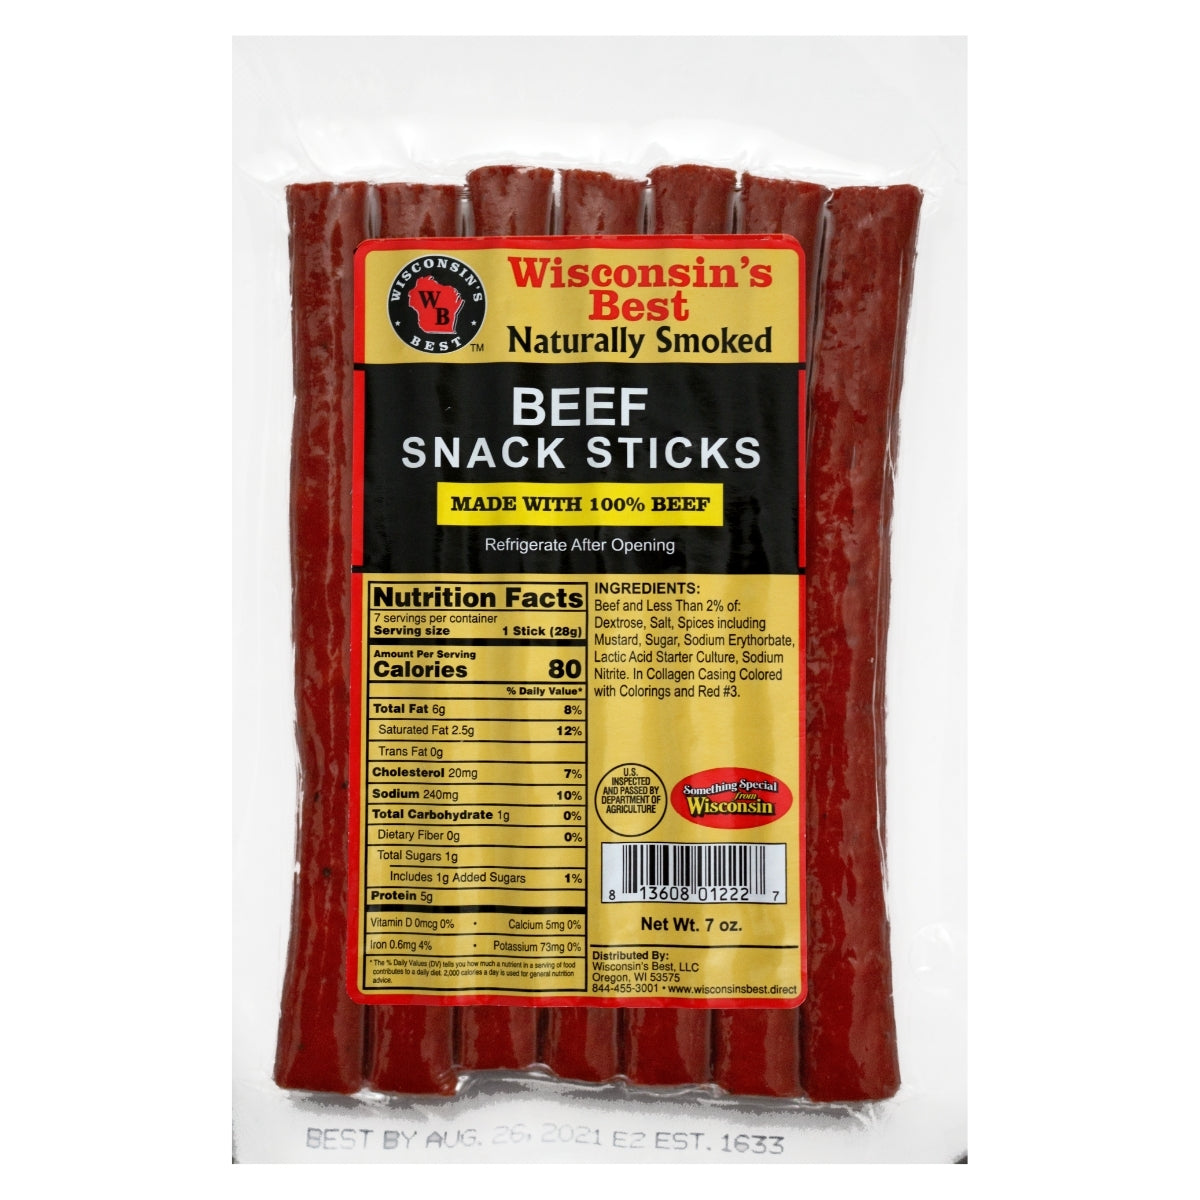 Pack of beef snack sticks